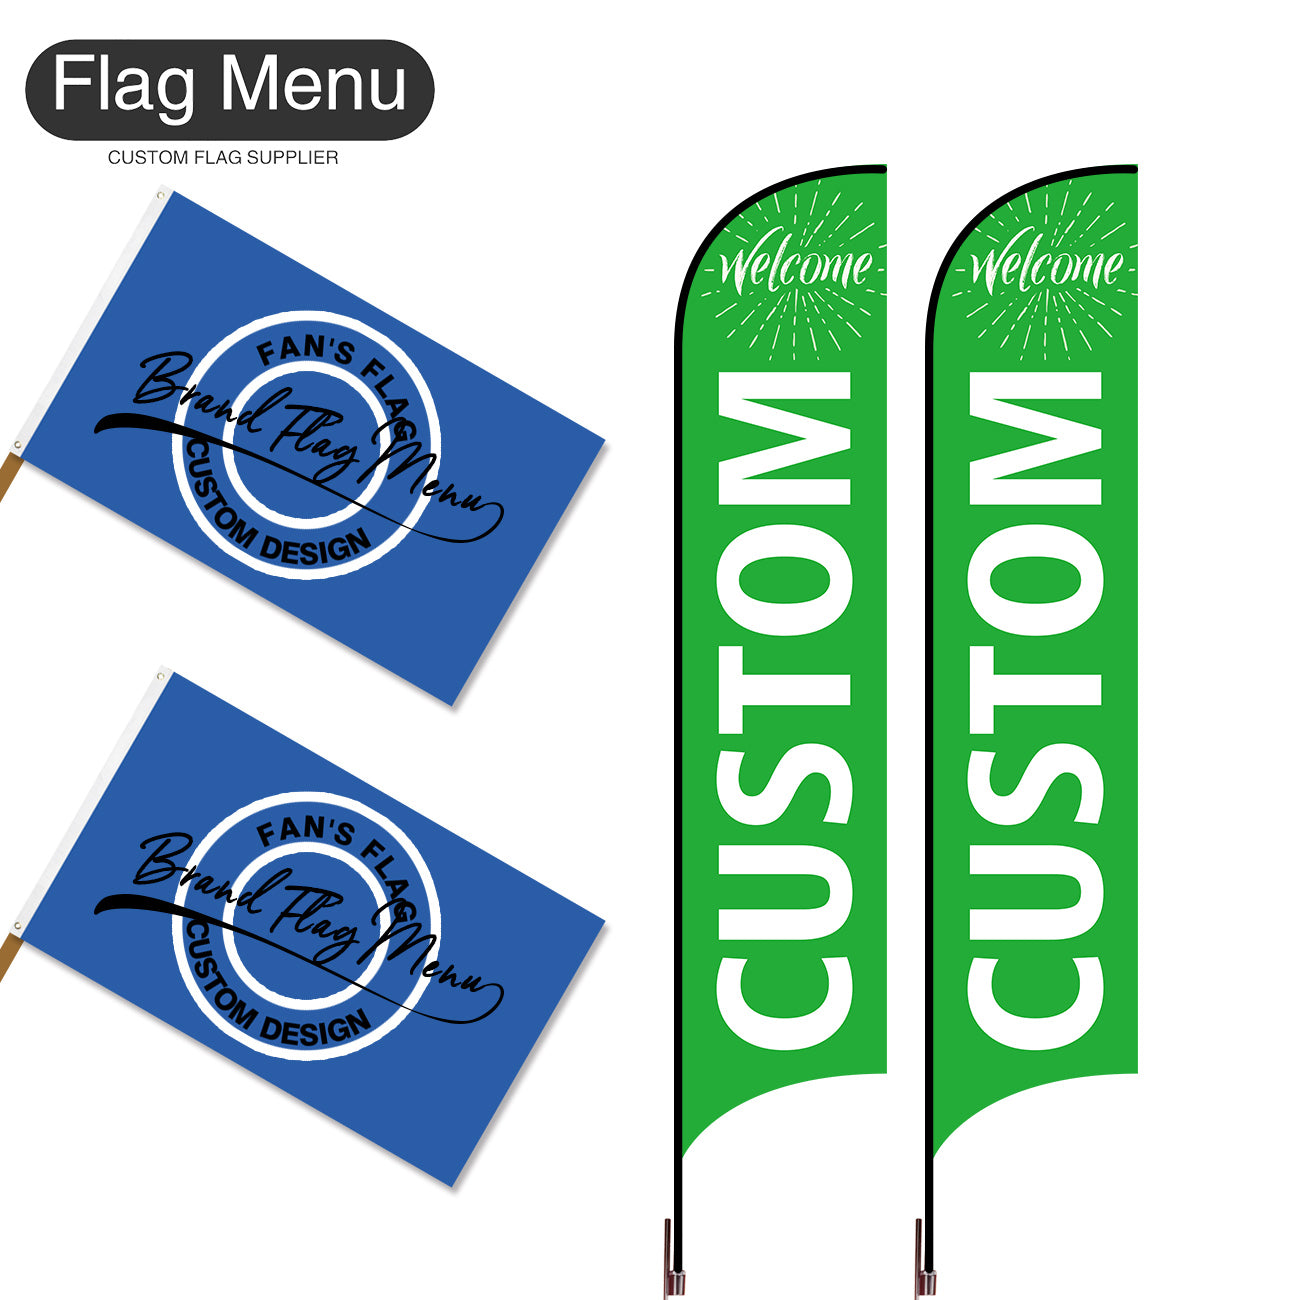 Outdoor Advertising Set - C-Green C-S - Feather Flag -Double Sided & 3'x5' Regular Flag -Single Sided-Cross & Water Bag-Flag Menu